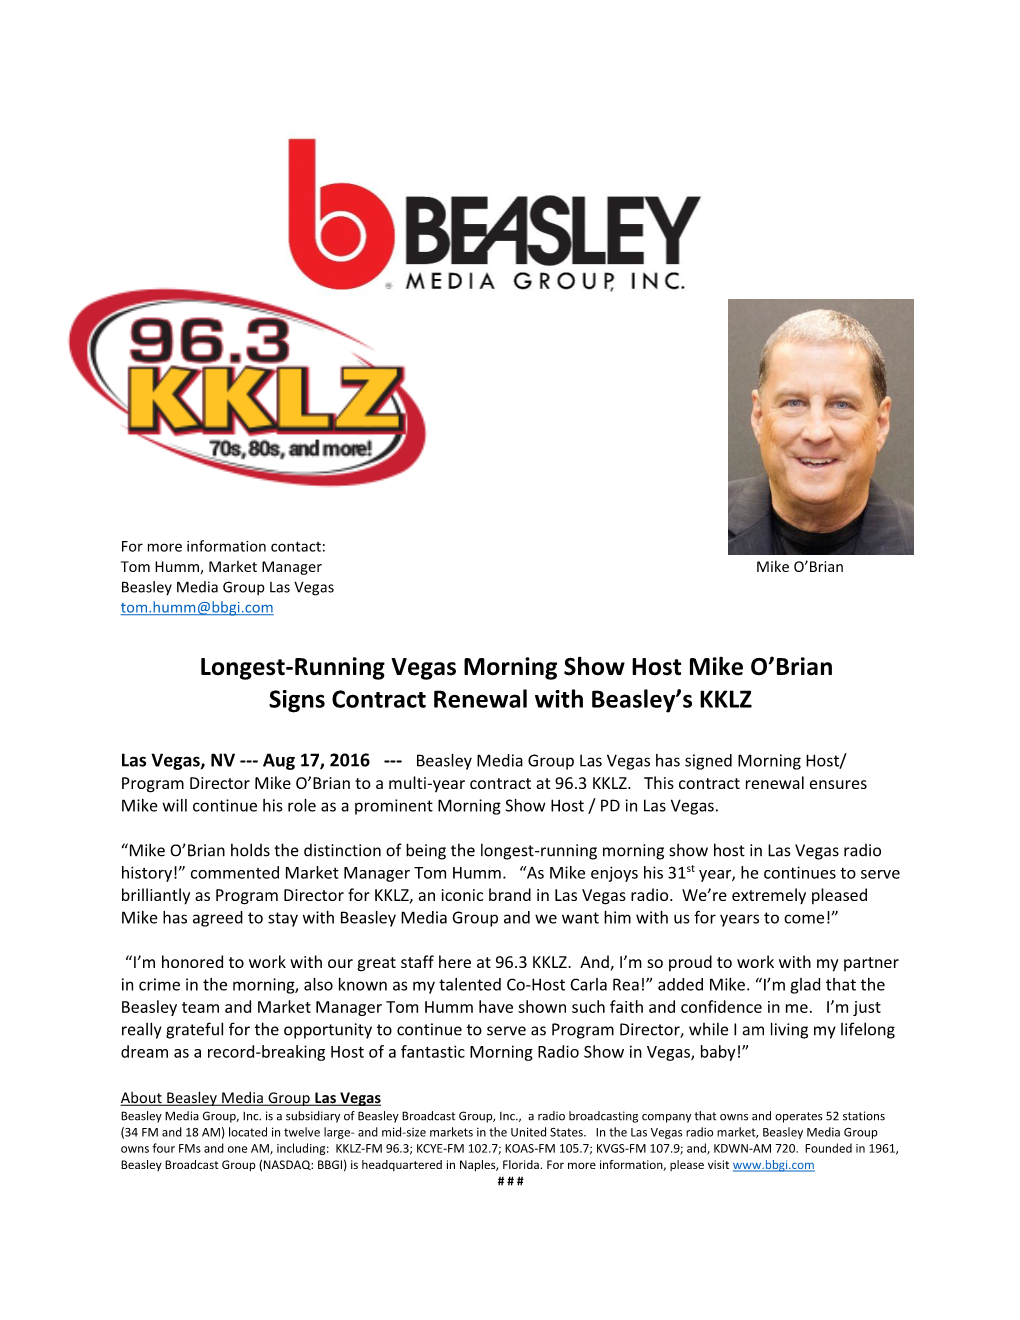 Longest-Running Vegas Morning Show Host Mike O'brian Signs Contract Renewal with Beasley's KKLZ